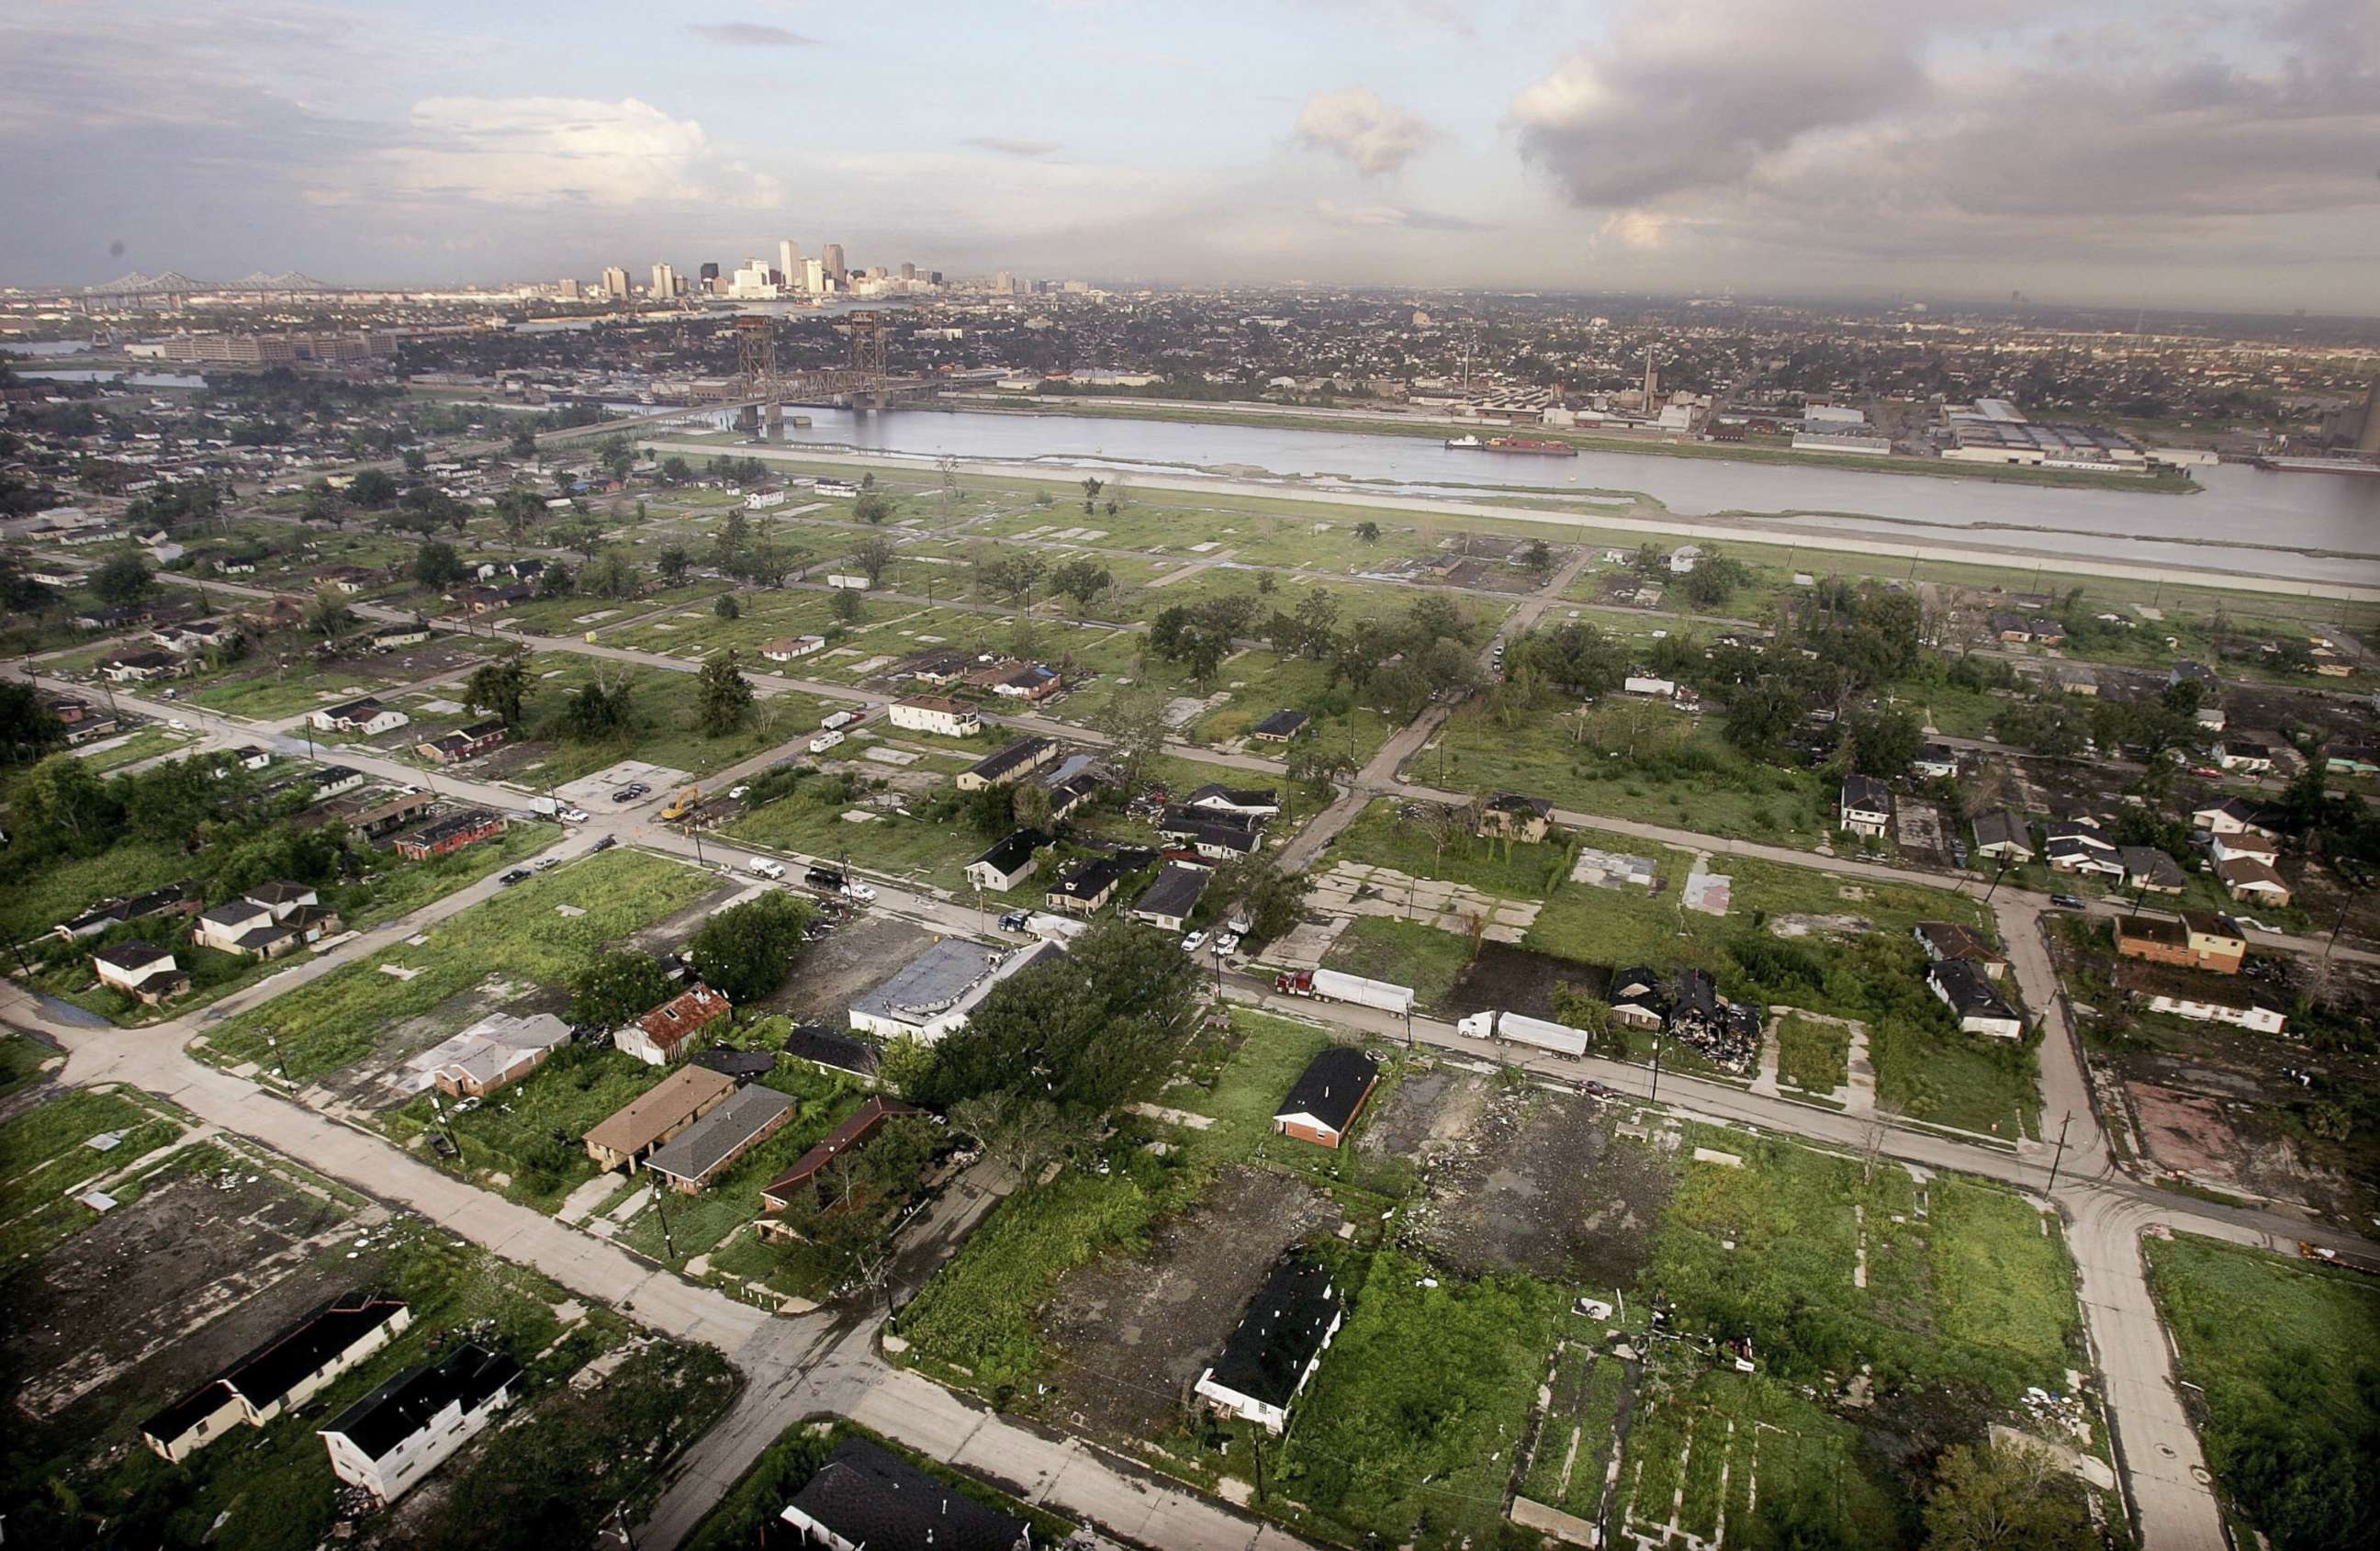 PHOTO: The devastated Lower Ninth Ward is seen in front of the Industrial Canal with the city skyline in the background, Aug. 25, 2006 in New Orleans, nearly a year after Hurricane Katrina.